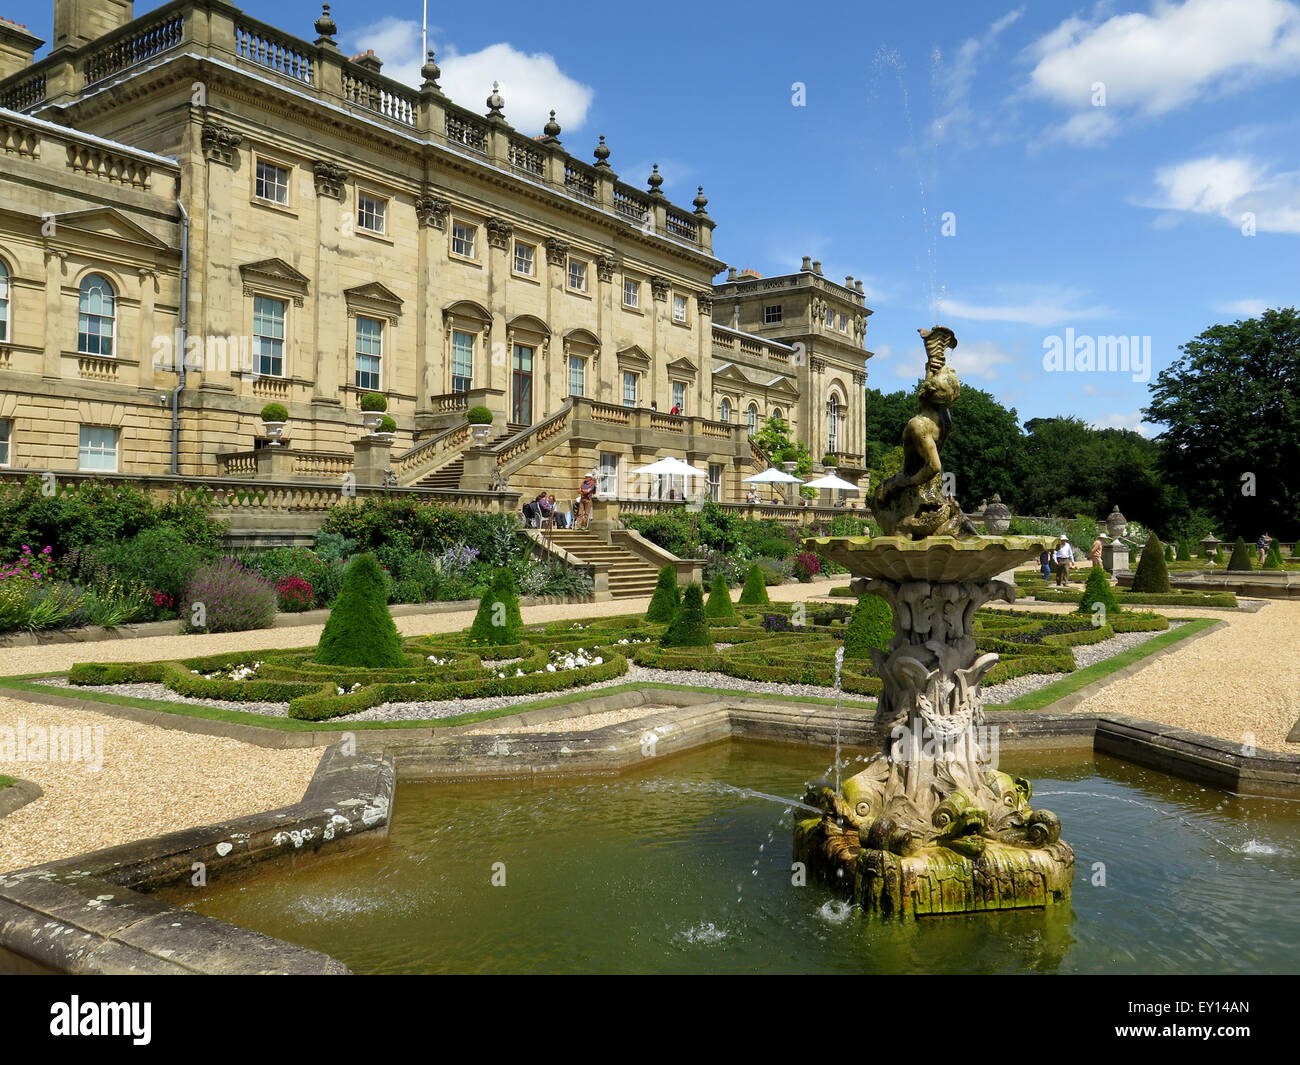 Statue on the Terrace at Harewood House, Nr Leeds, Yorkshire, UK Stock Photo